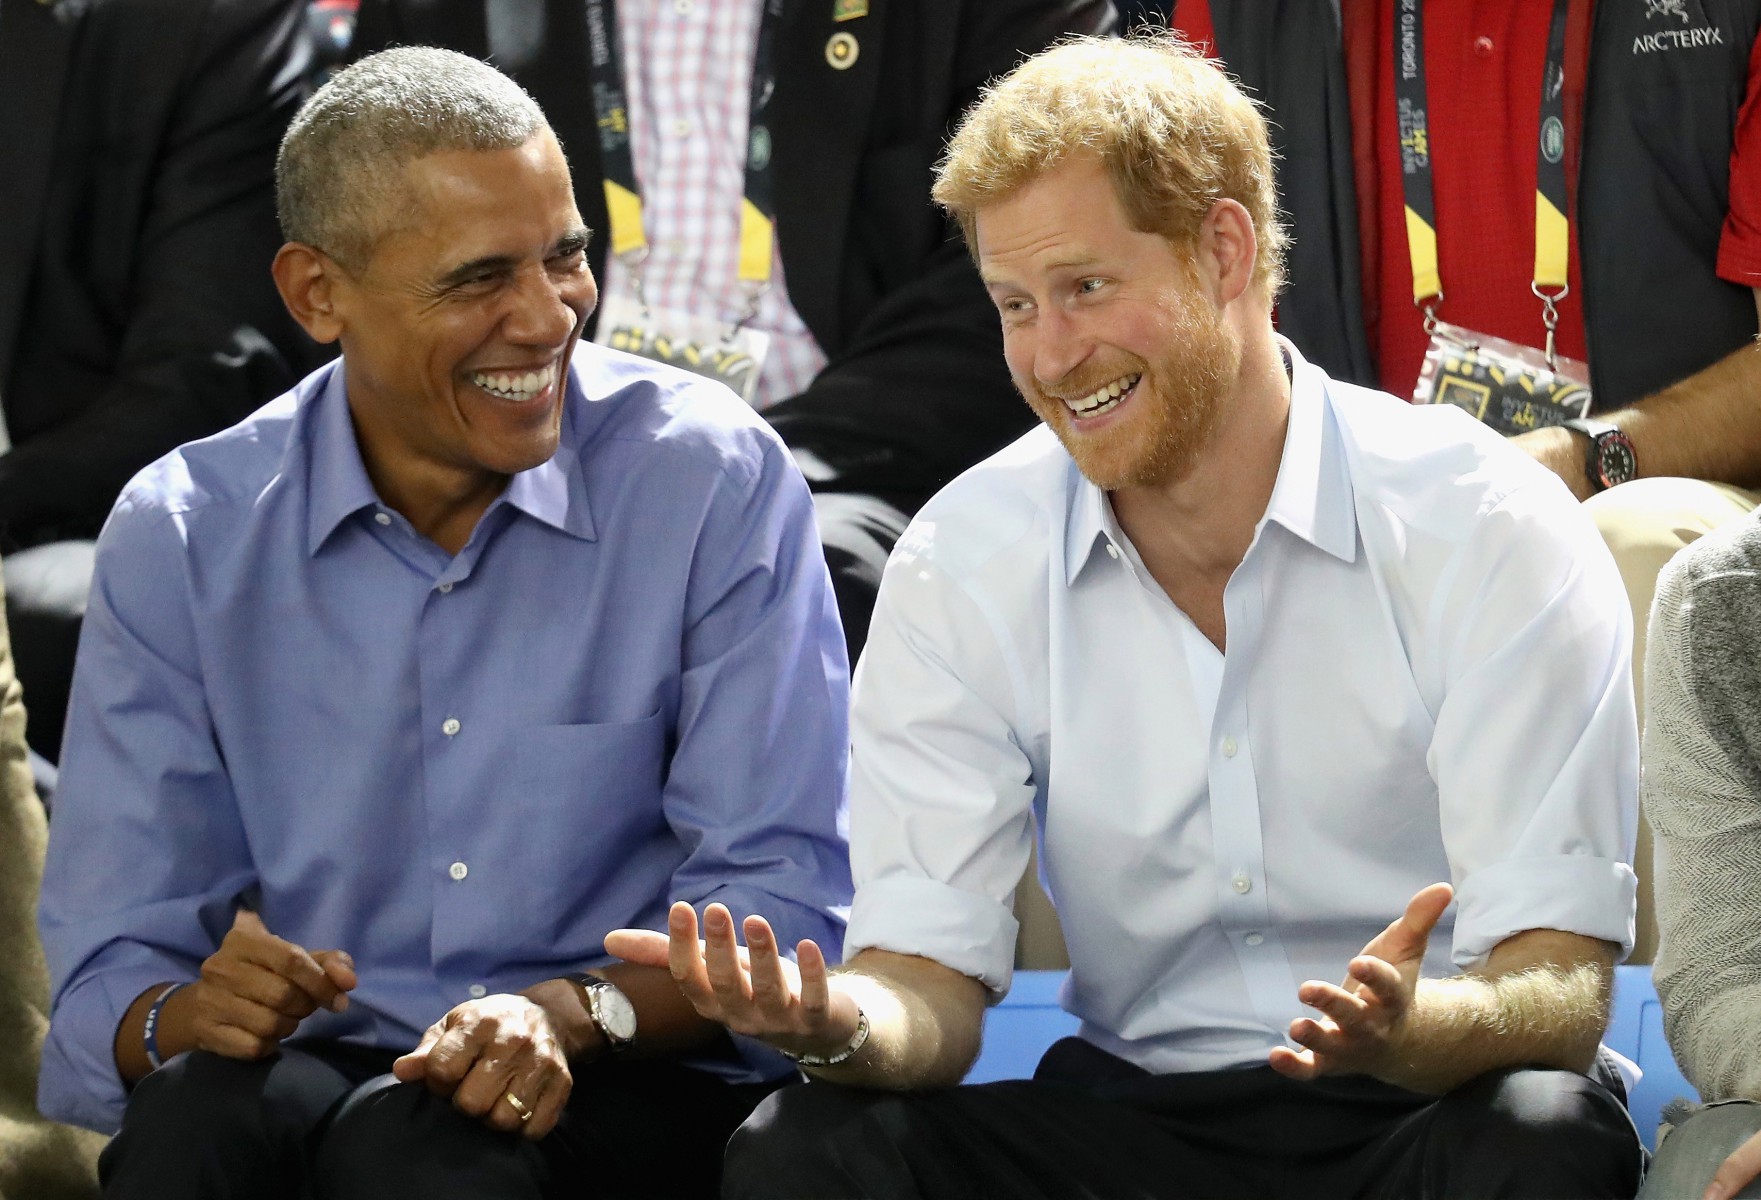 Harry was embarrassed over dinner with the Obamas